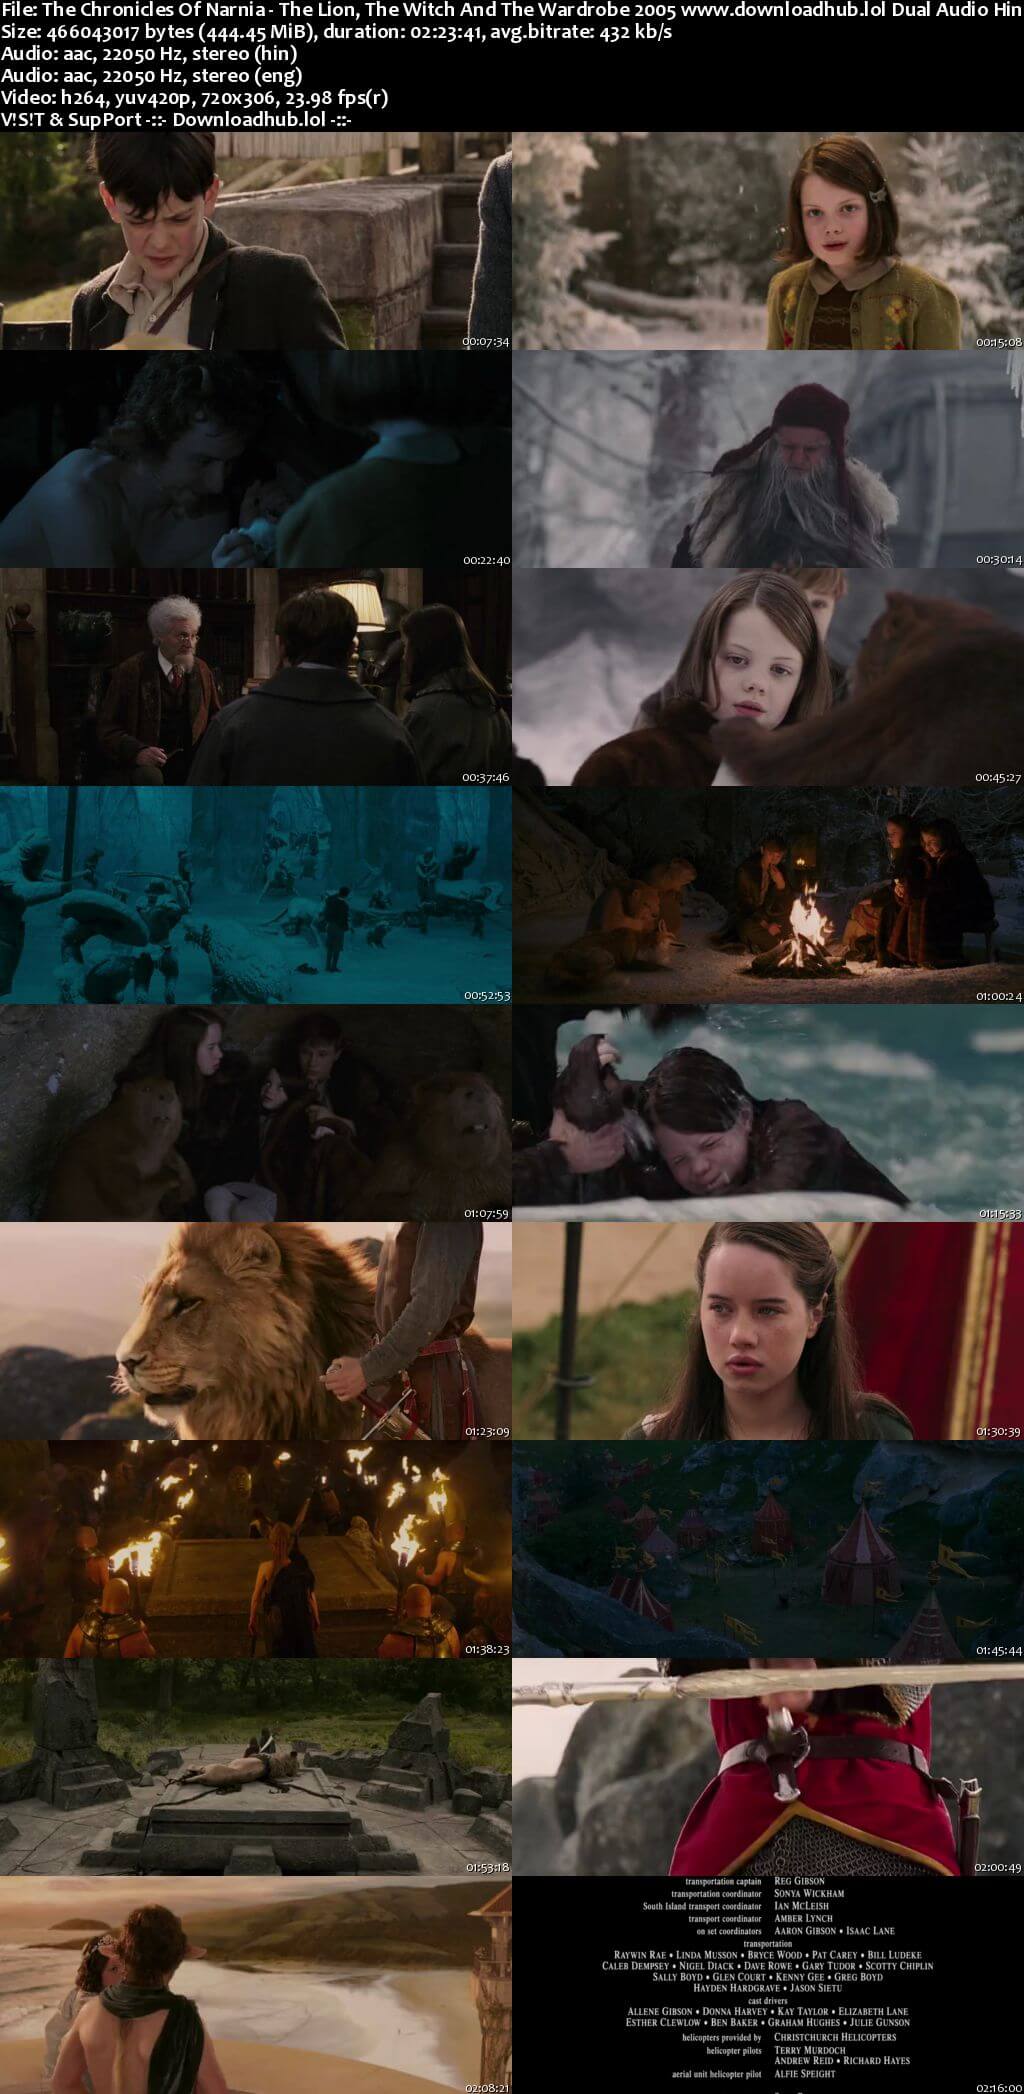 The Chronicles of Narnia The Lion the Witch and the Wardrobe 2005 Hindi Dual Audio 400MB BluRay 480p ESubs